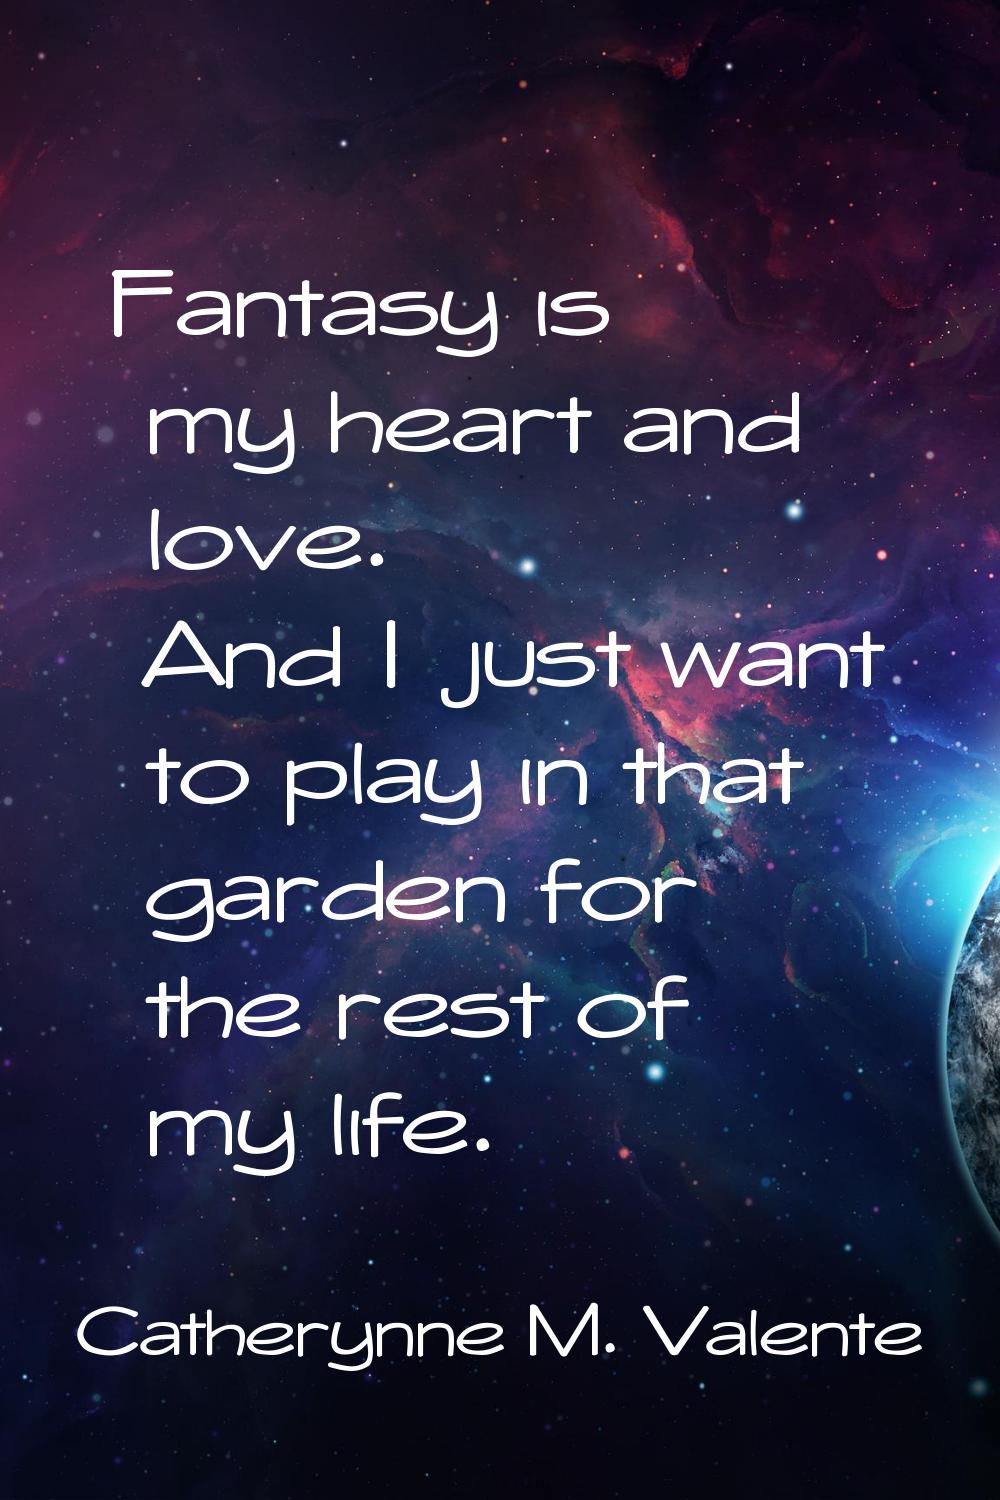 Fantasy is my heart and love. And I just want to play in that garden for the rest of my life.